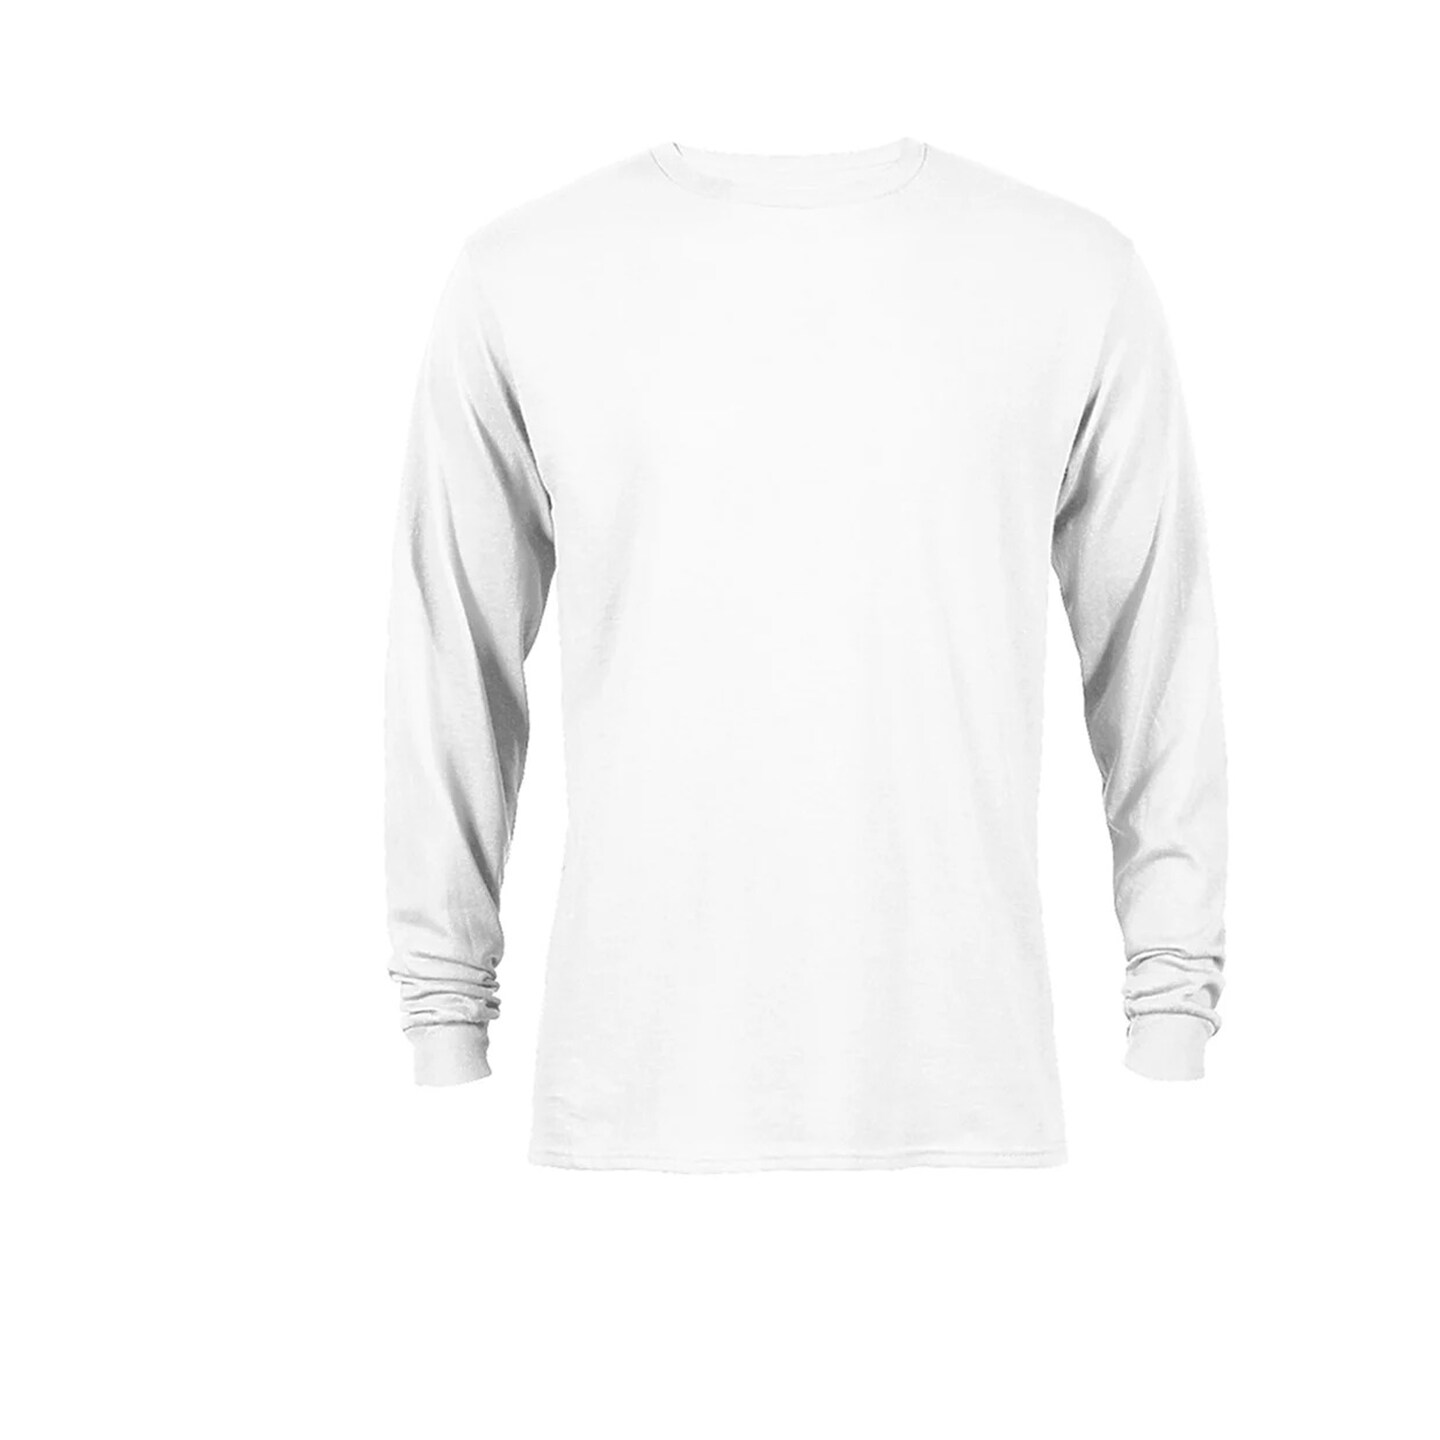 Why Long-Sleeve T-Shirts Are Essential for Your Wardrobe